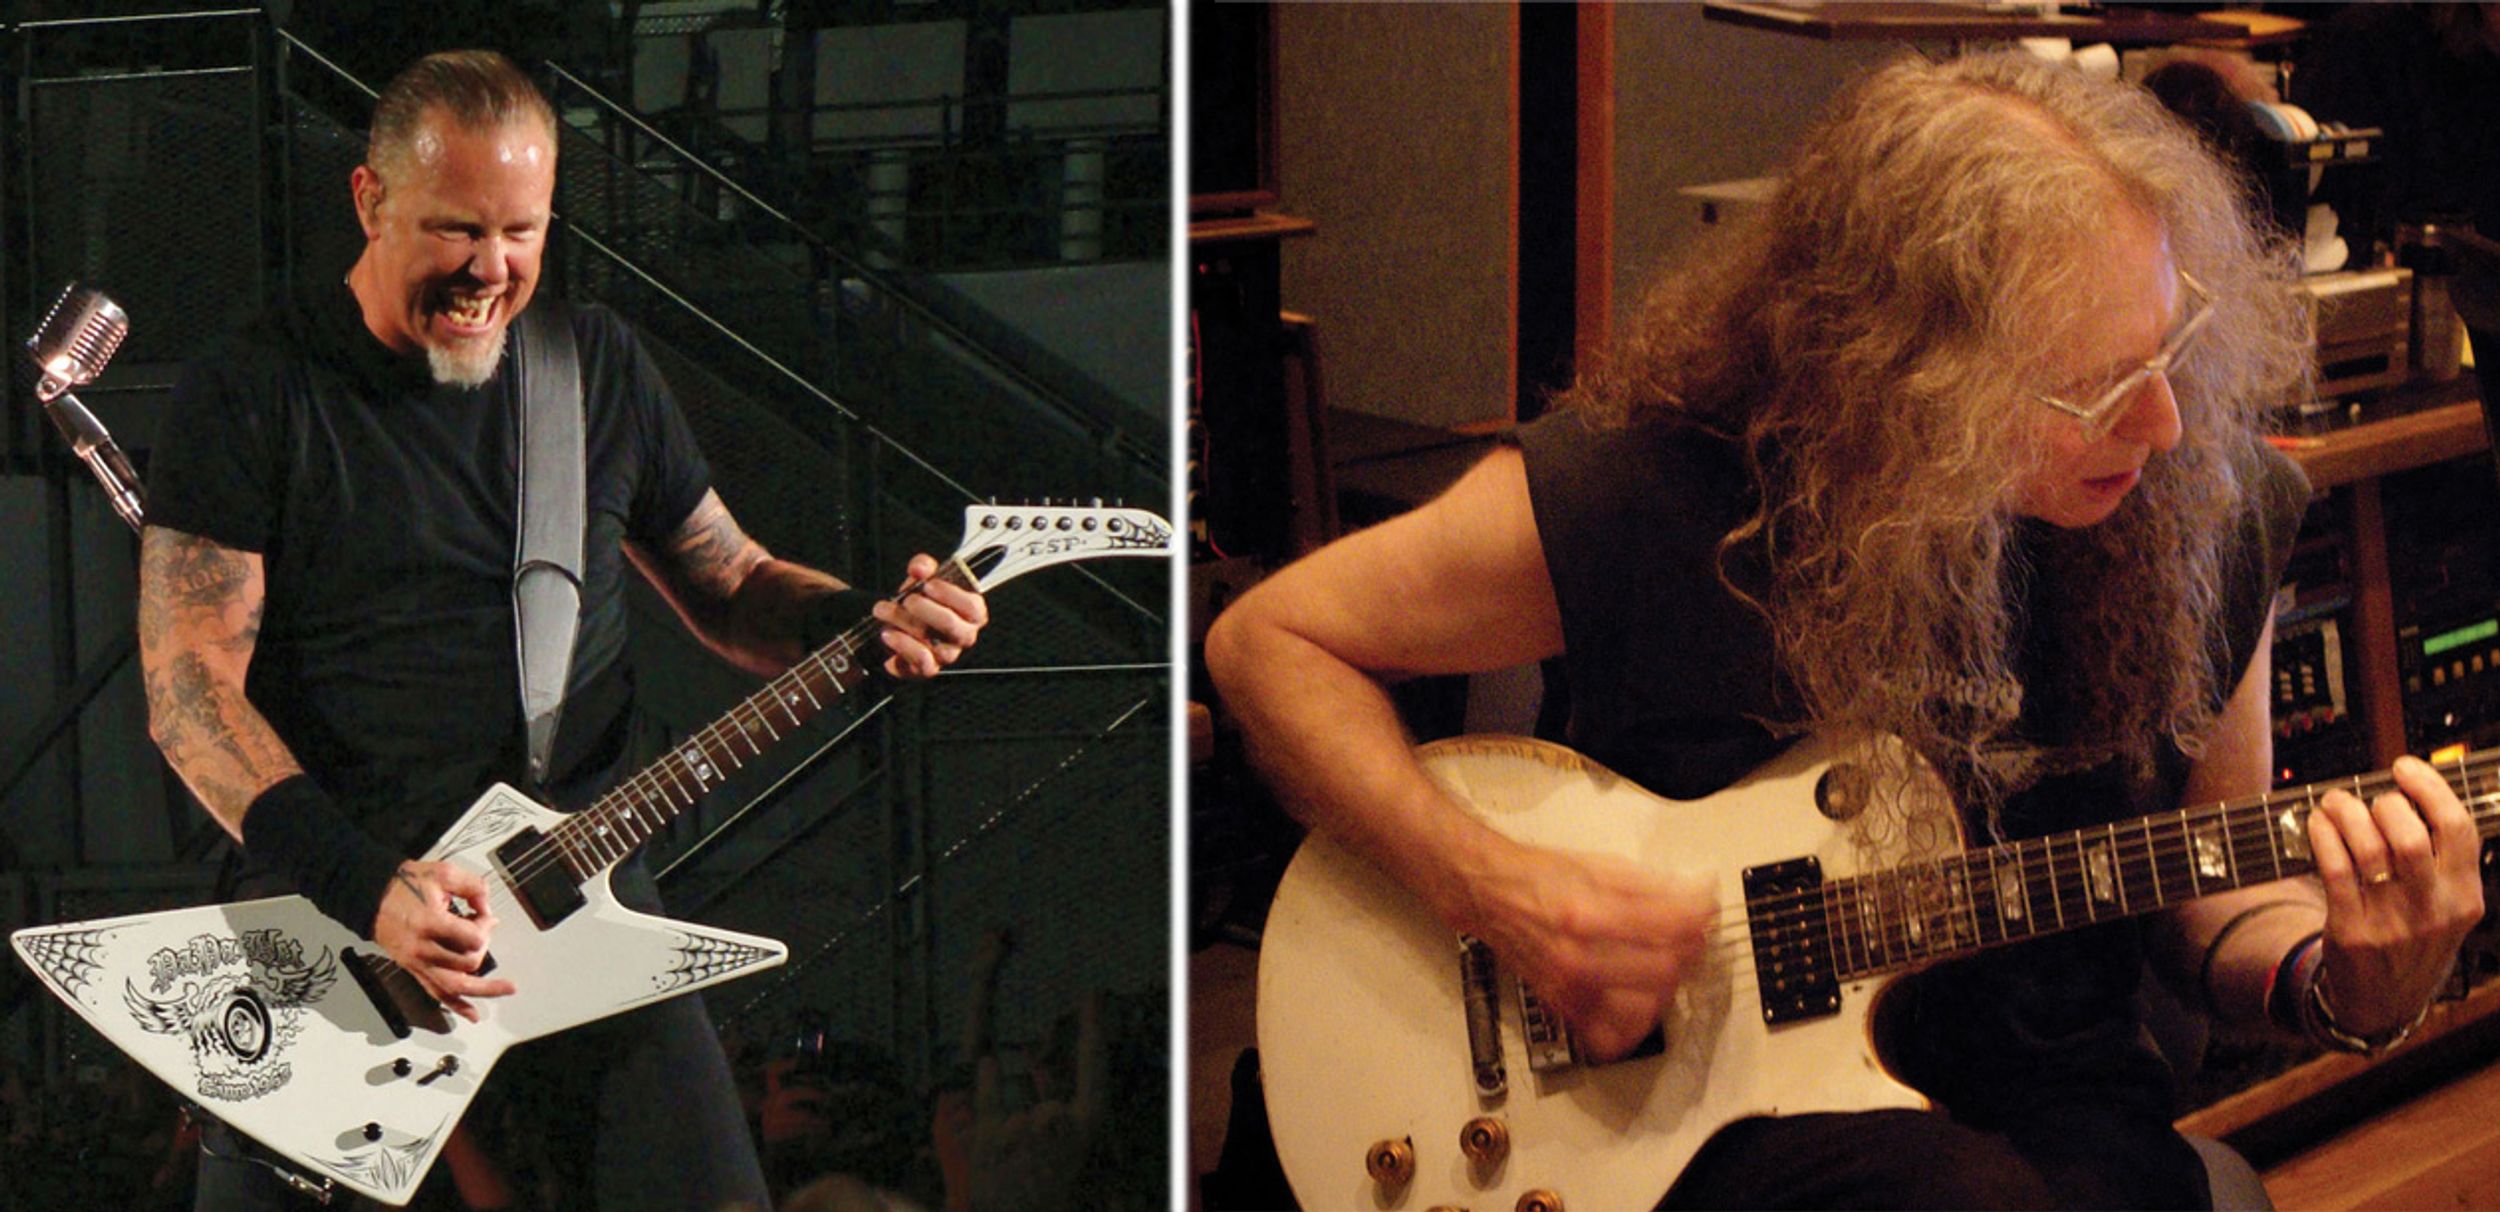 What Do James Hetfield and Waddy Wachtel Have in Common?